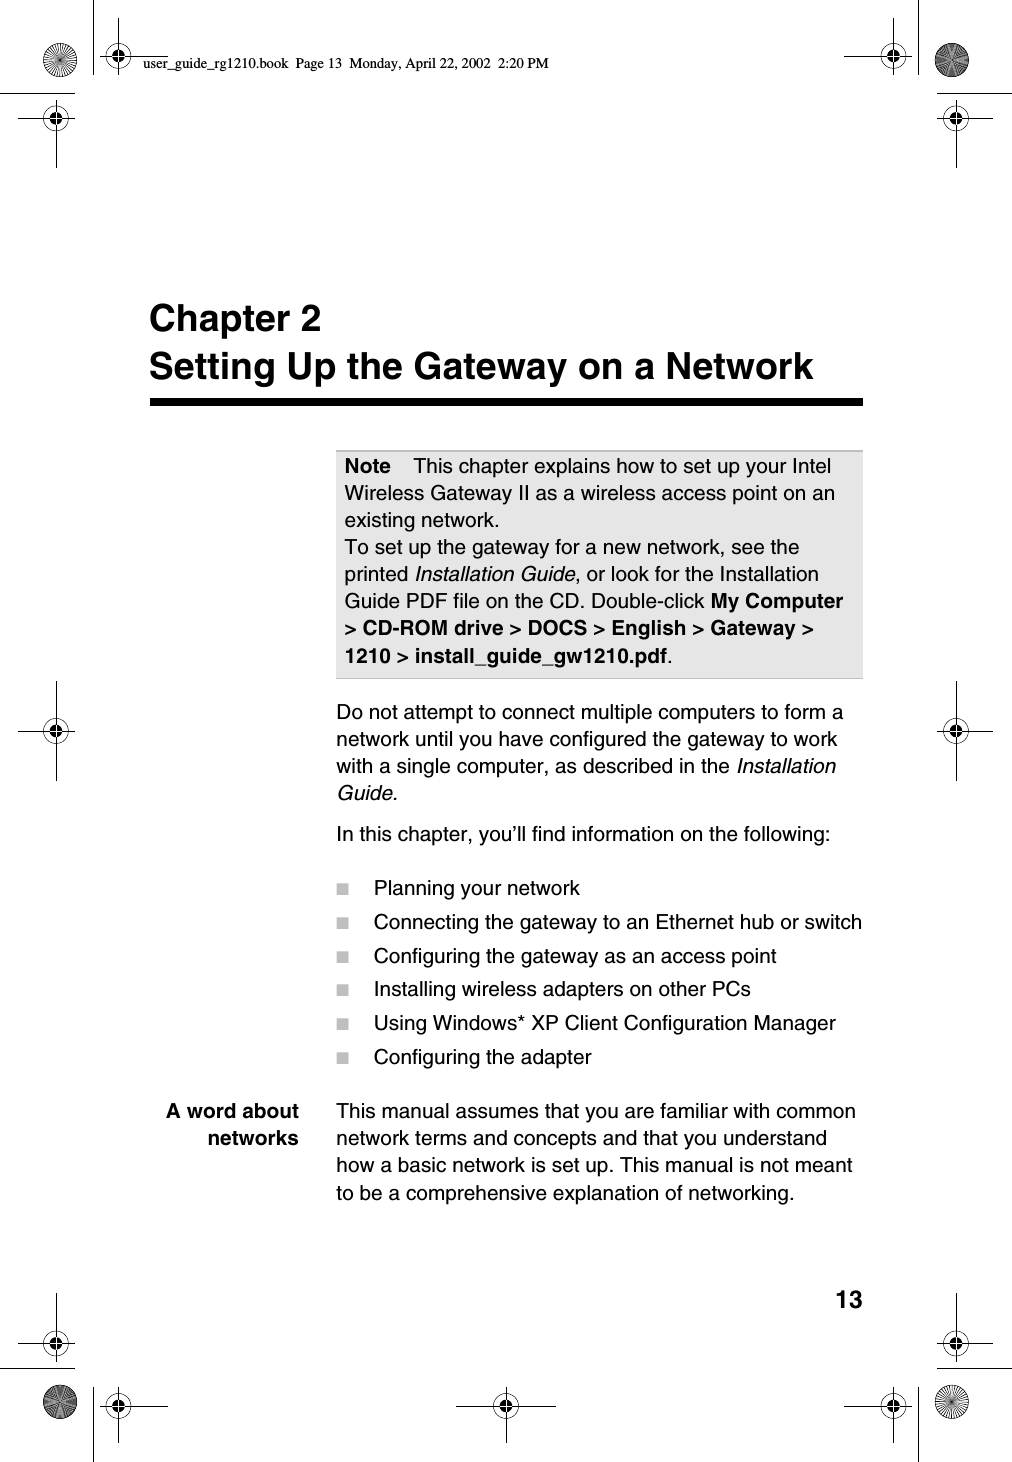 13Chapter 2Setting Up the Gateway on a NetworkDo not attempt to connect multiple computers to form anetwork until you have configured the gateway to workwith a single computer, as described in the InstallationGuide.In this chapter, you’ll find information on the following:■Planning your network■Connecting the gateway to an Ethernet hub or switch■Configuring the gateway as an access point■Installing wireless adapters on other PCs■Using Windows* XP Client Configuration Manager■Configuring the adapterA word aboutnetworksThis manual assumes that you are familiar with commonnetwork terms and concepts and that you understandhow a basic network is set up. This manual is not meantto be a comprehensive explanation of networking.Note This chapter explains how to set up your IntelWireless Gateway II as a wireless access point on anexisting network.To set up the gateway for a new network, see theprinted Installation Guide, or look for the InstallationGuide PDF file on the CD. Double-click My Computer&gt; CD-ROM drive &gt; DOCS &gt; English &gt; Gateway &gt;1210 &gt; install_guide_gw1210.pdf.user_guide_rg1210.book Page 13 Monday, April 22, 2002 2:20 PM